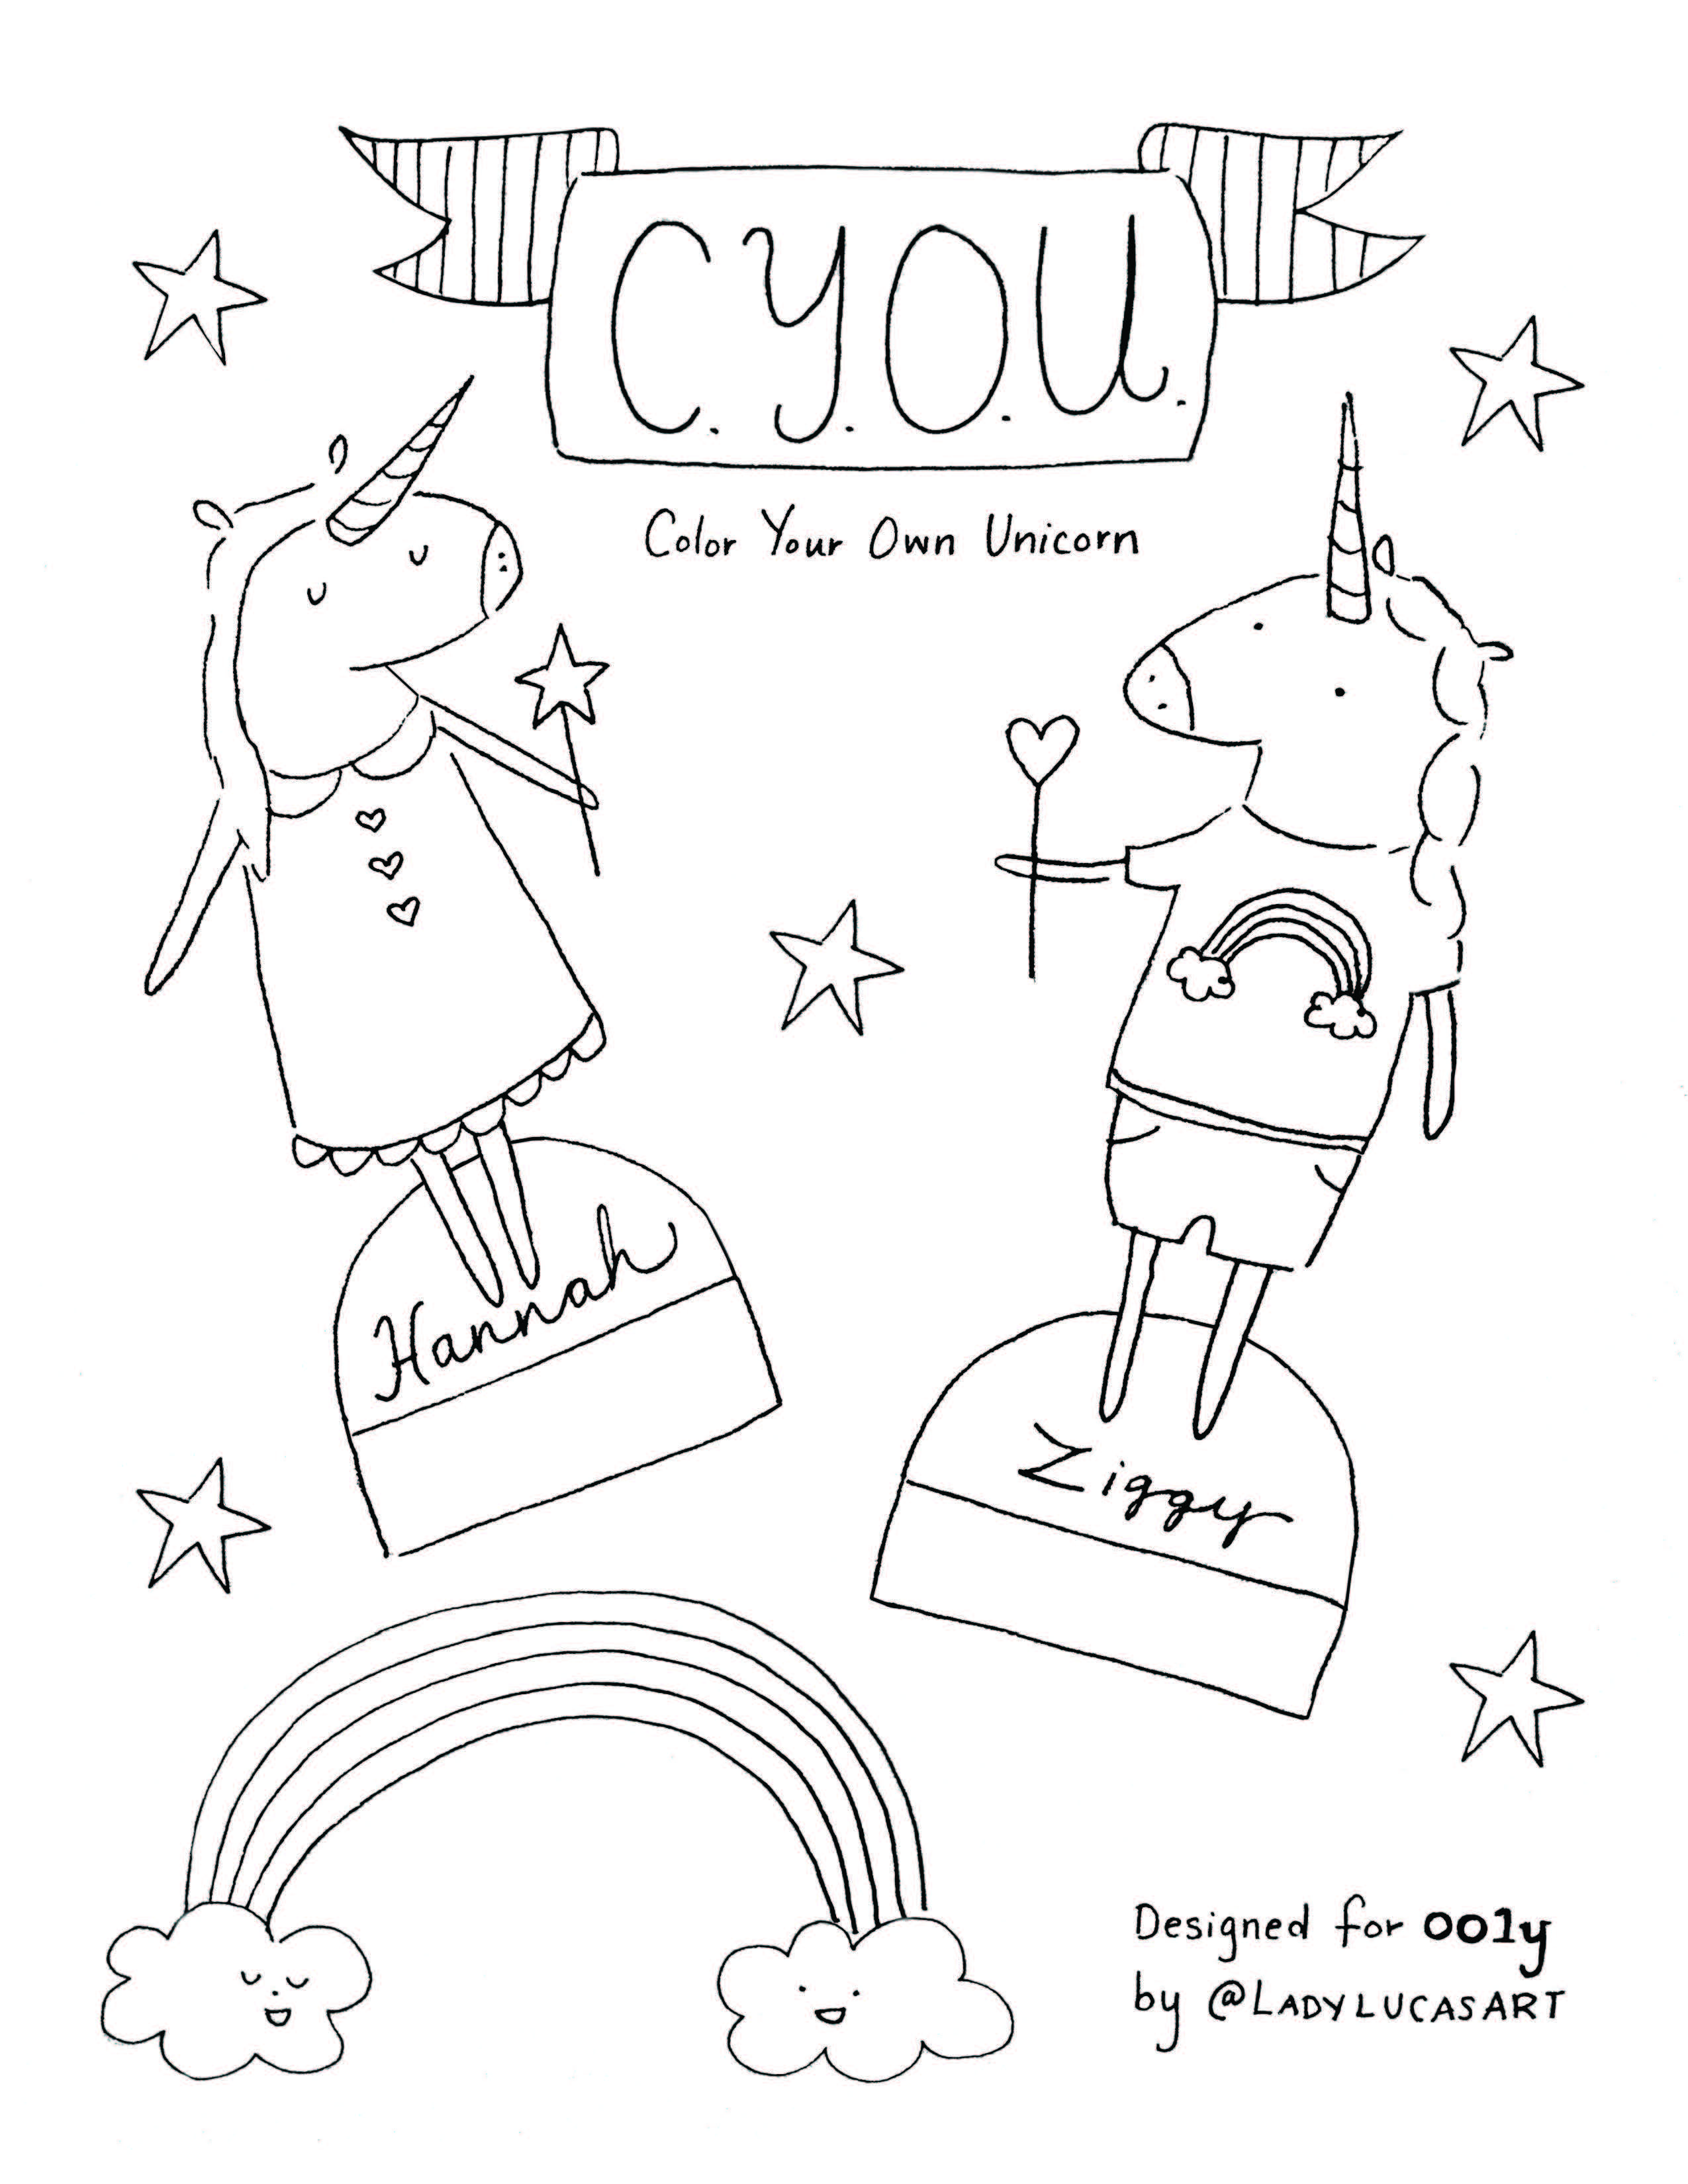 Cut and color your own unicorn coloring page